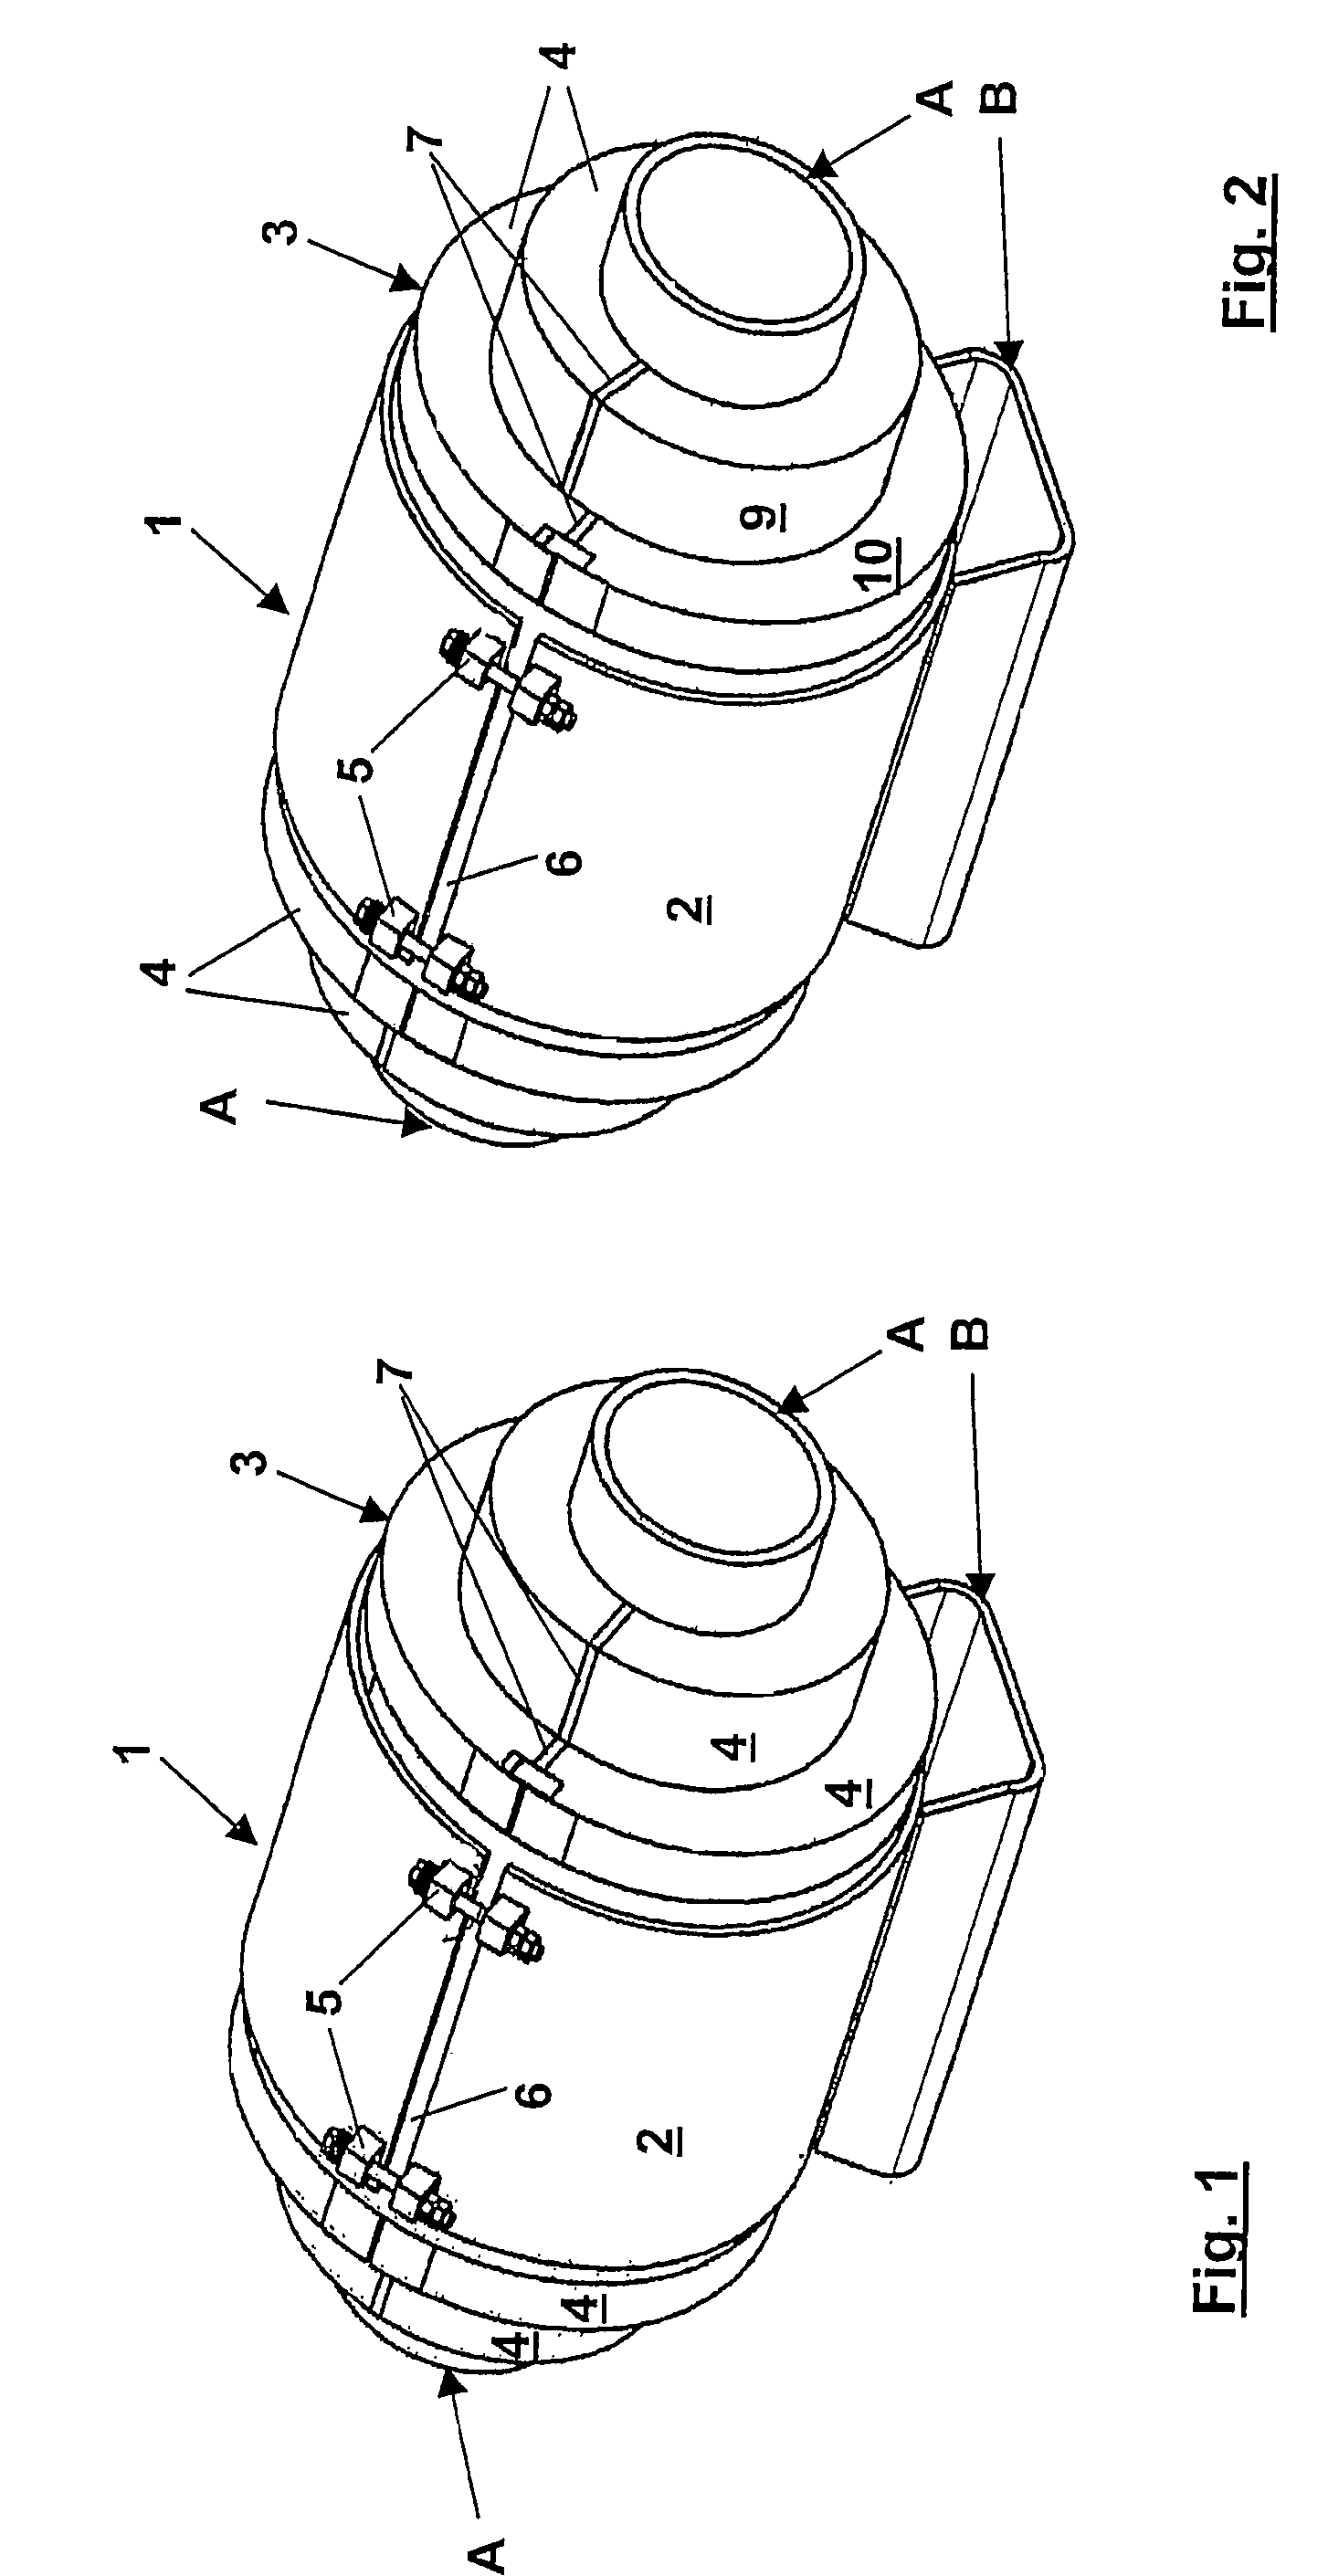 Cold-insulated fixed-point support